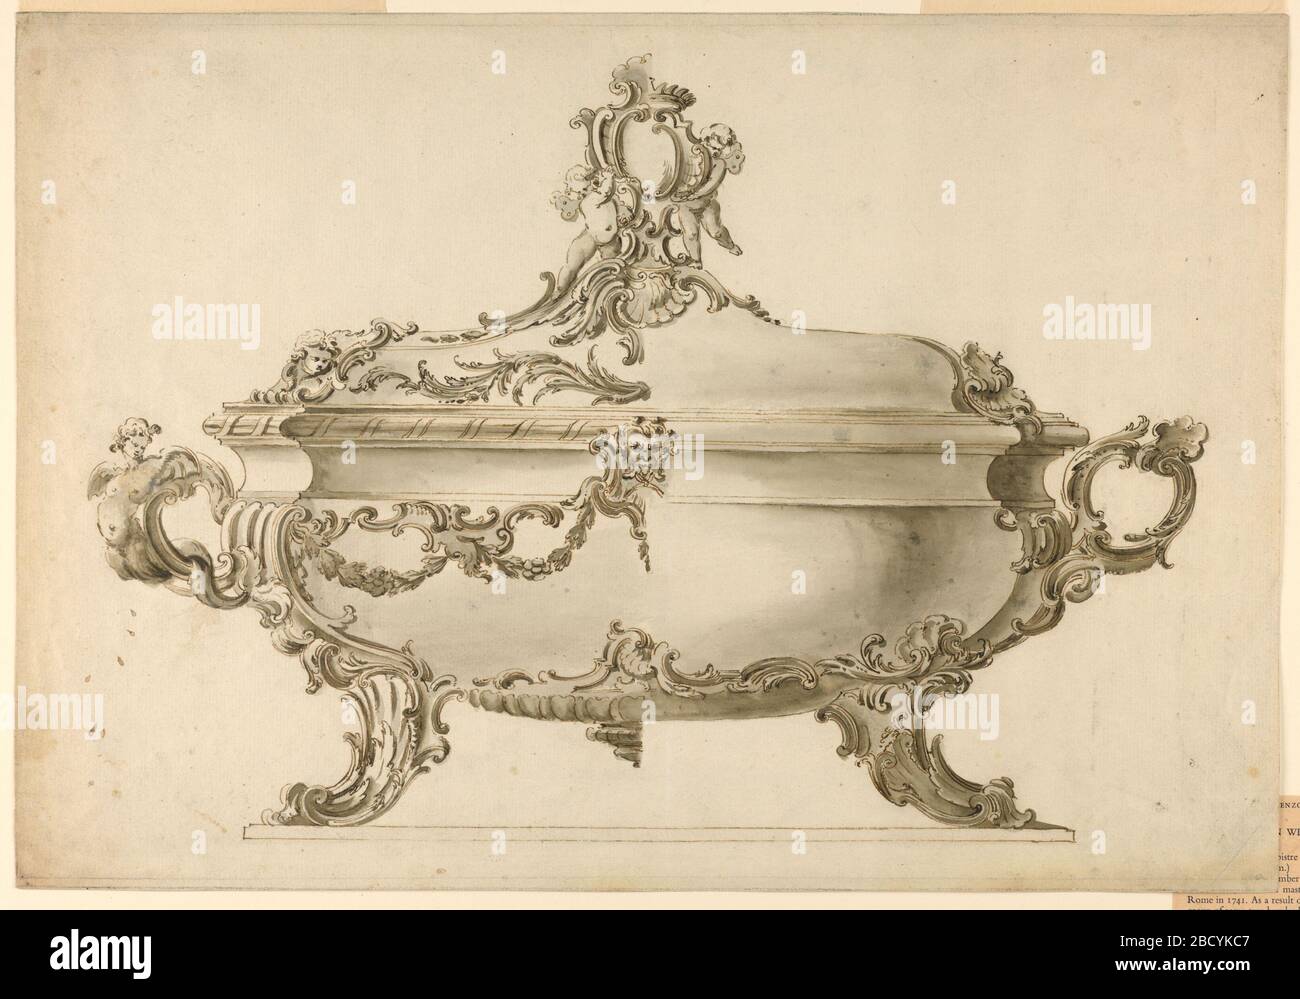 The Elevation of a Silver or Silver Gilt Tureen. Research in ProgressThe left half suggests a much richer decoration--with rocaille and floral motifs--than the right one. The handle at left is composed of scrolls and a sea harp, the right one of scrolls and a shell. Two putti hold an escutcheon on top of the cover. The Elevation of a Silver or Silver Gilt Tureen Stock Photo